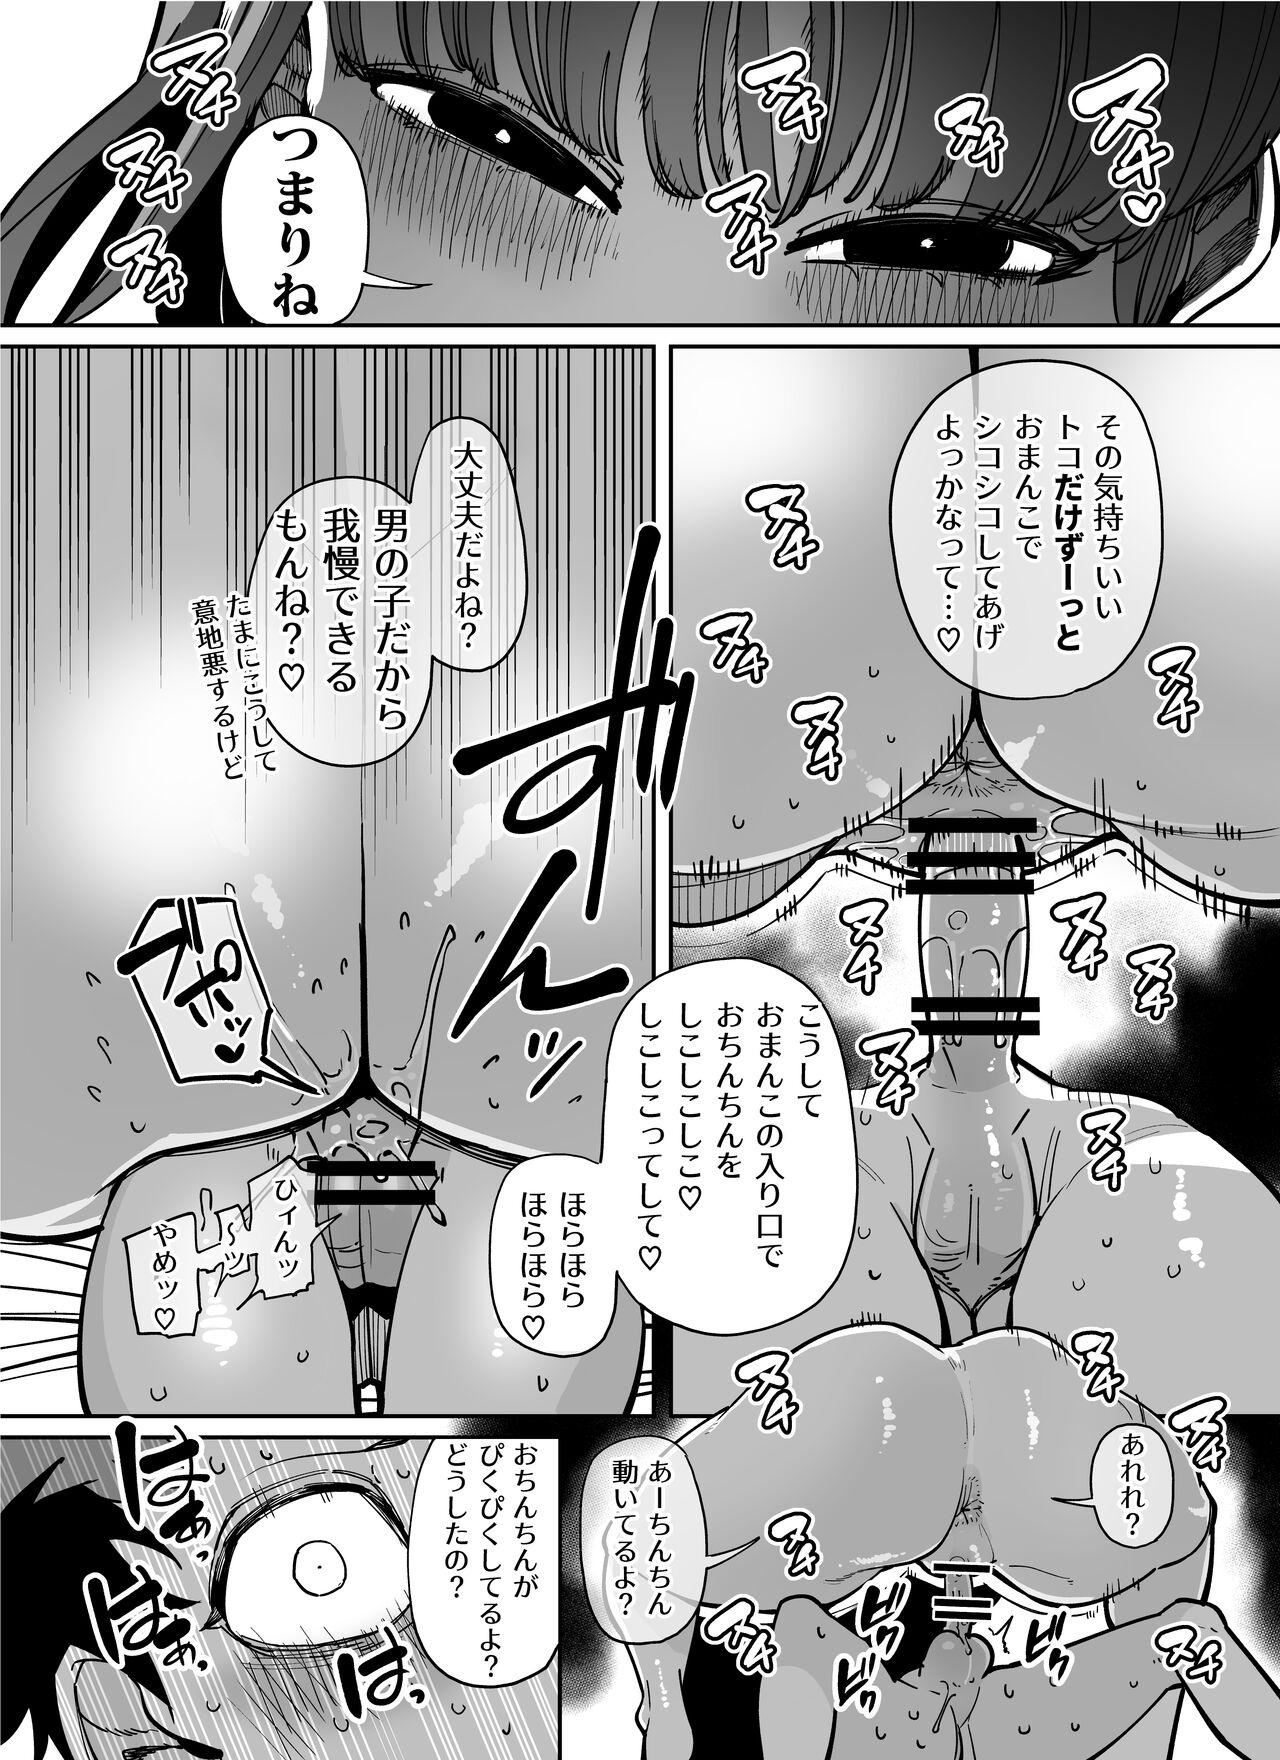 Wam 「言ったね？」 Hot Whores - Page 6